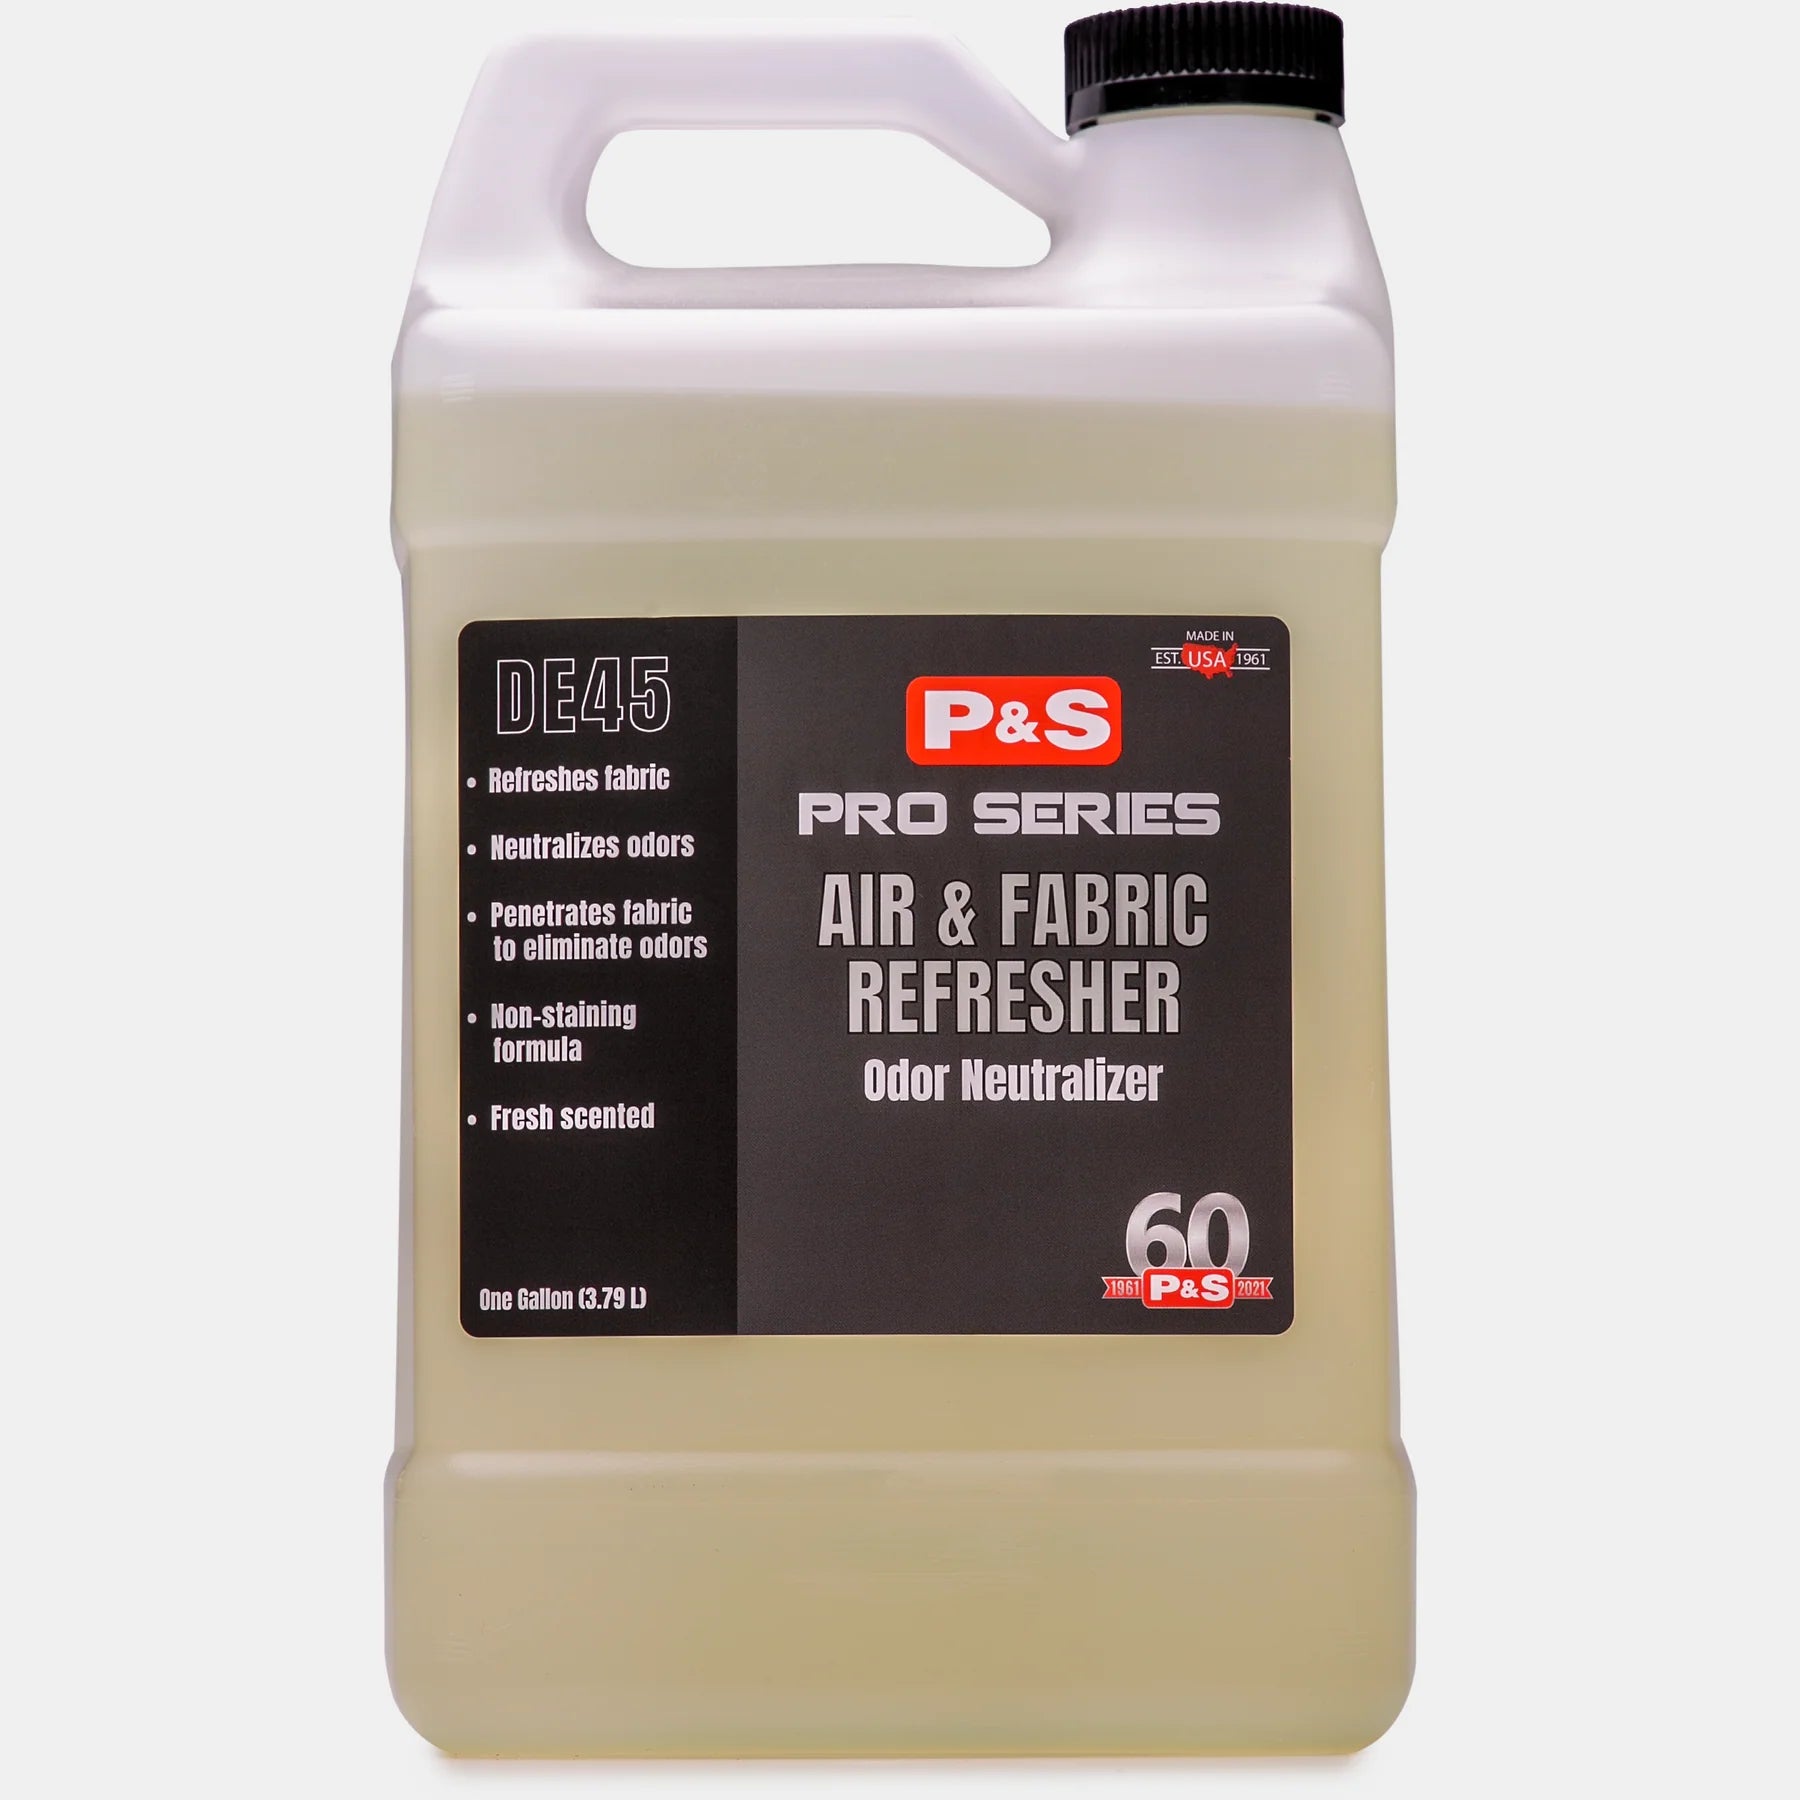 P&S Air and Fabric Refresher